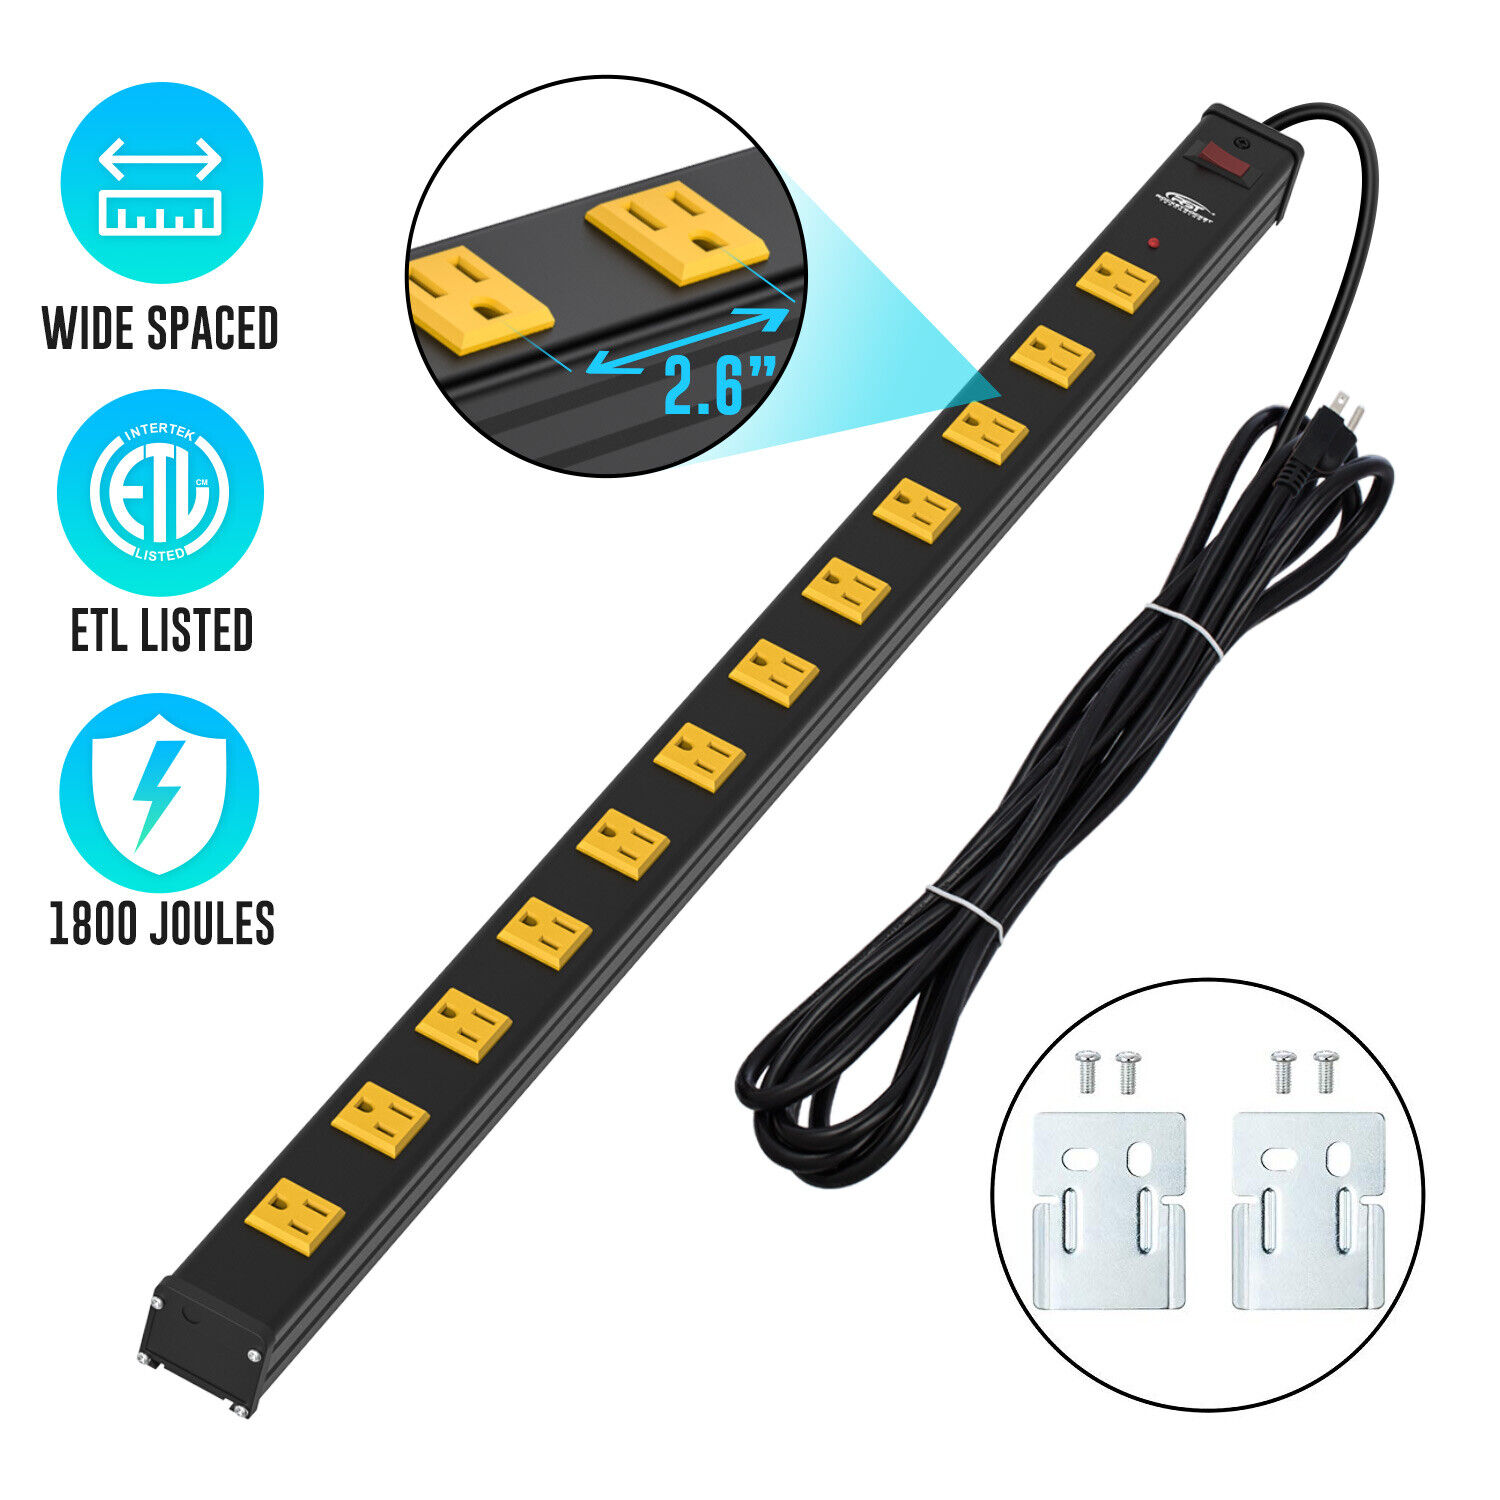 CRST Heavy Duty Power Strip Bar Surge Protector 12-Outlet 15FT Long 1800 Joules